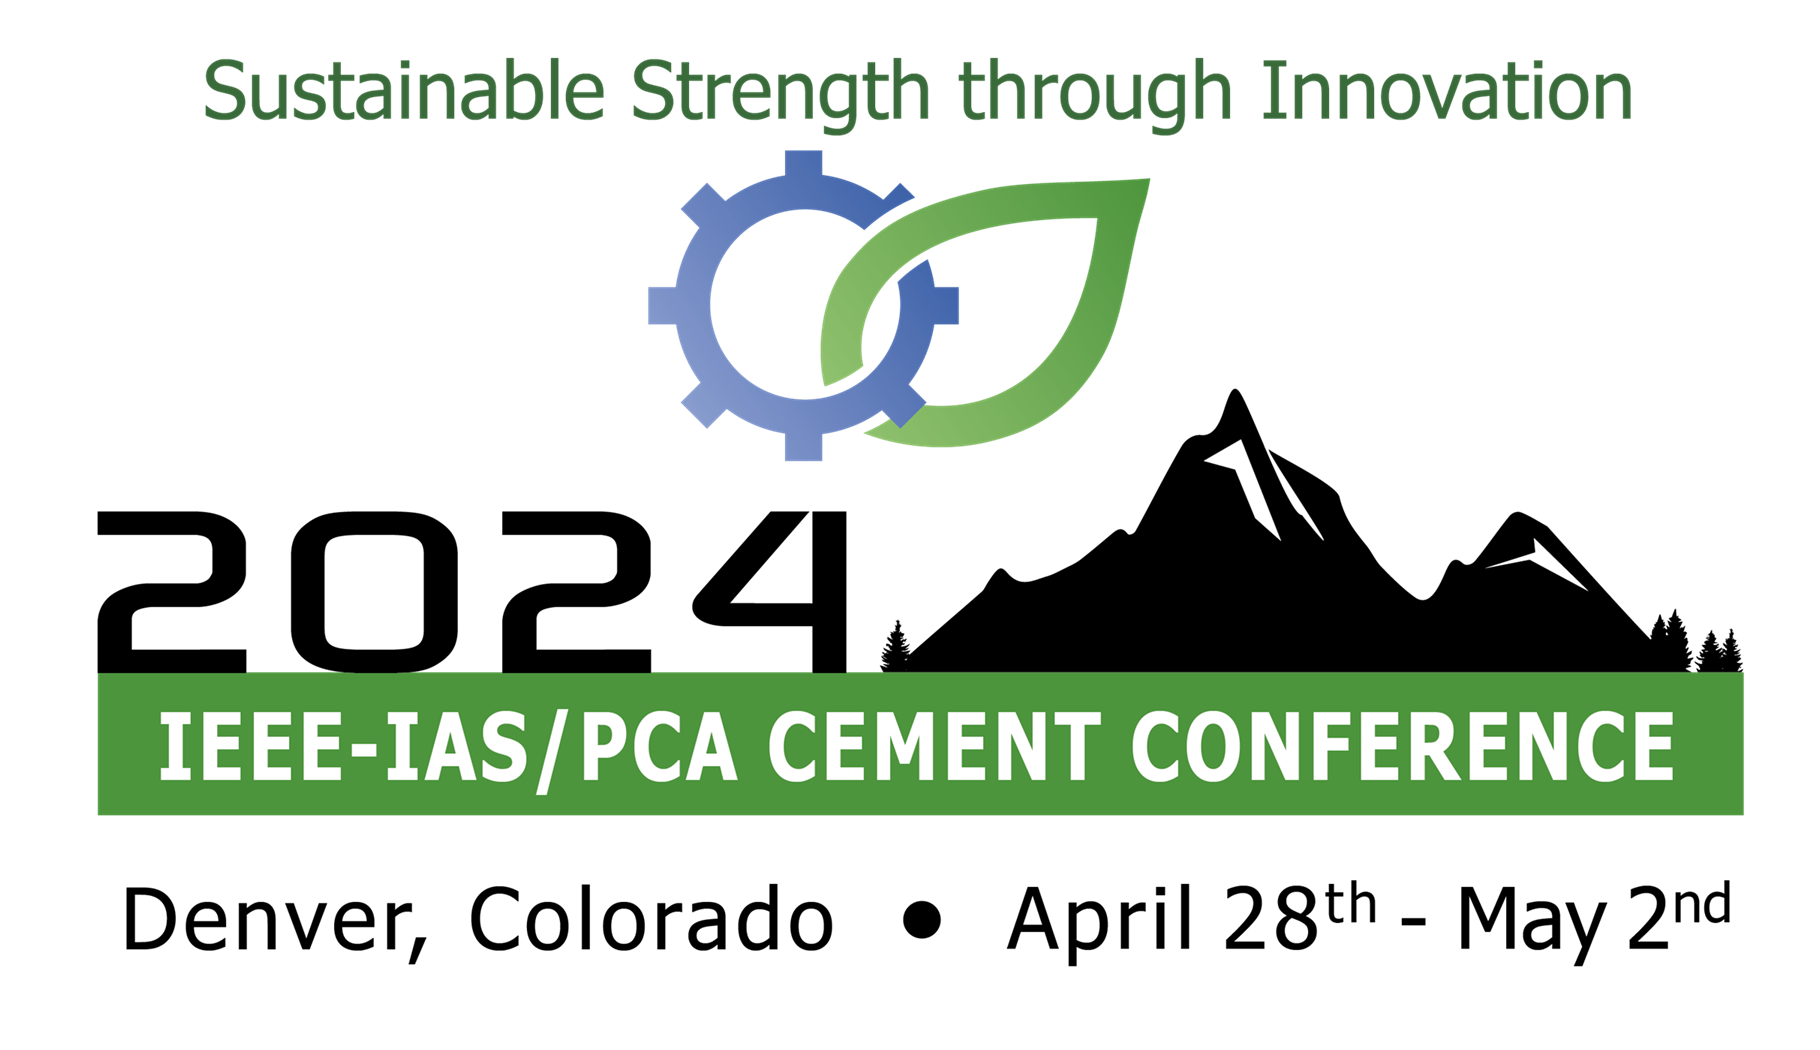 Logo for 2024 IEEE-IAS/PCA Cement Conference